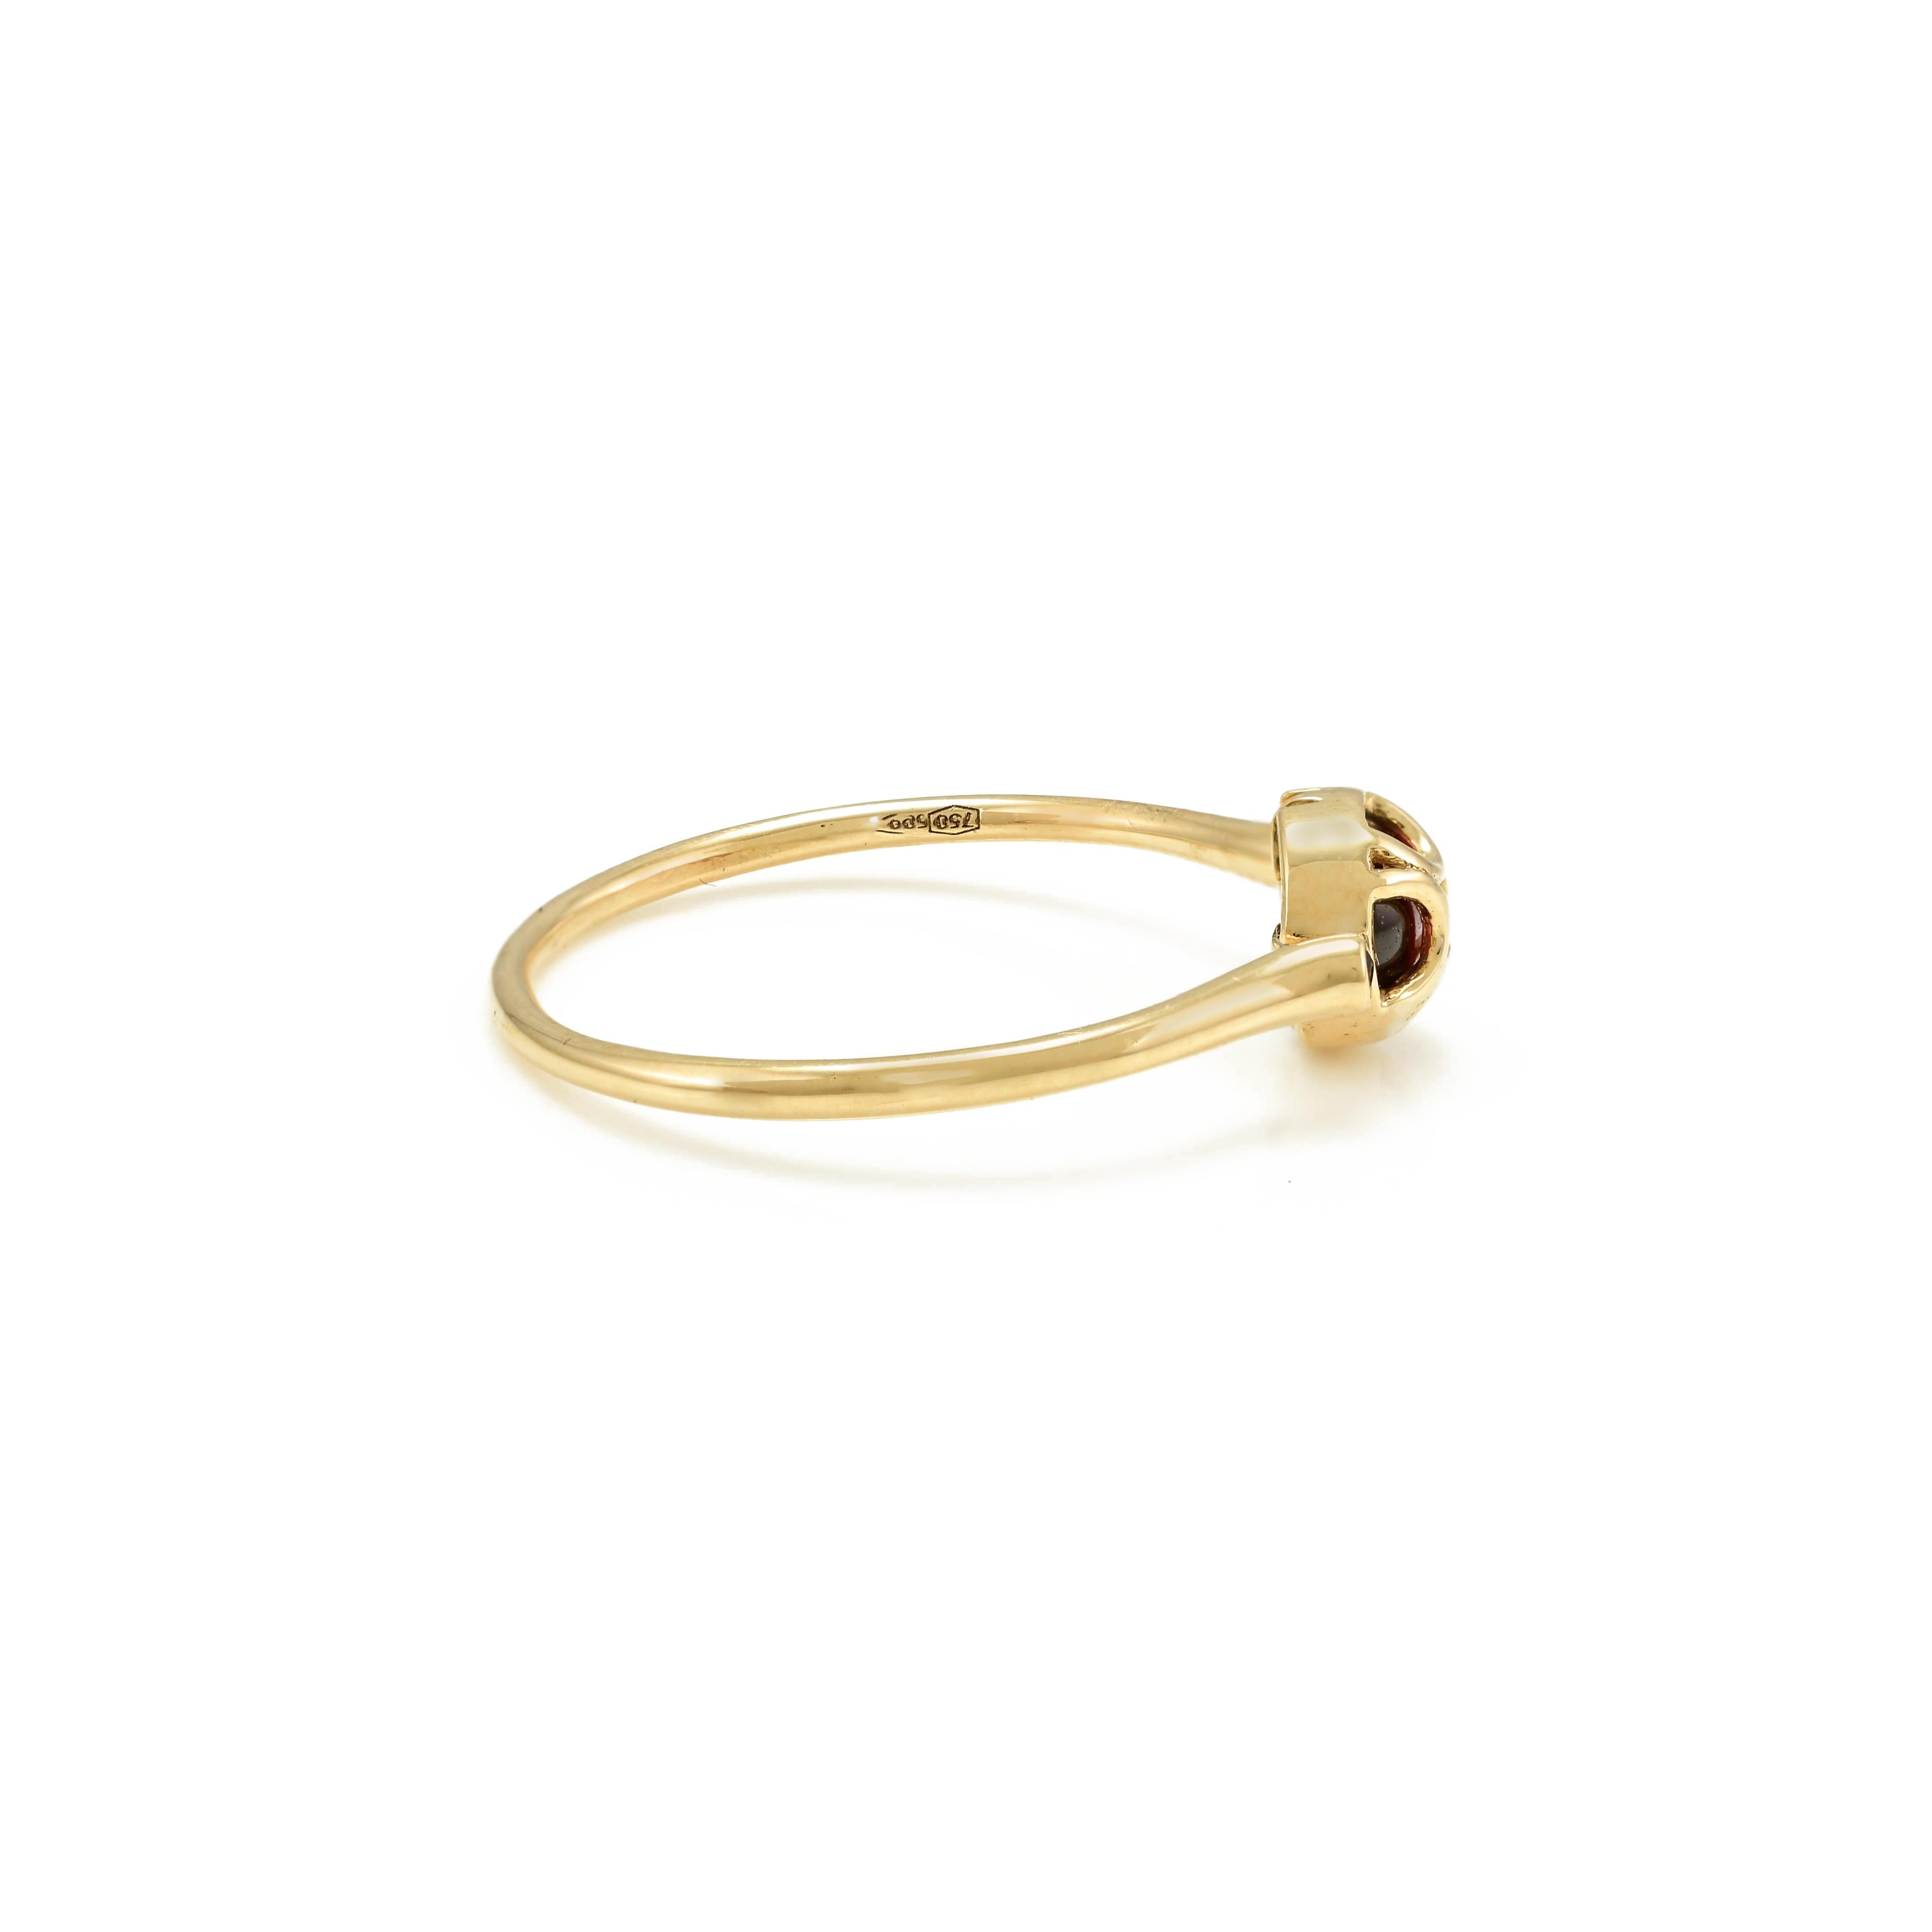 For Sale:  Everyday Minimalist Garnet Ring in 18k Solid Yellow Gold For Her 7